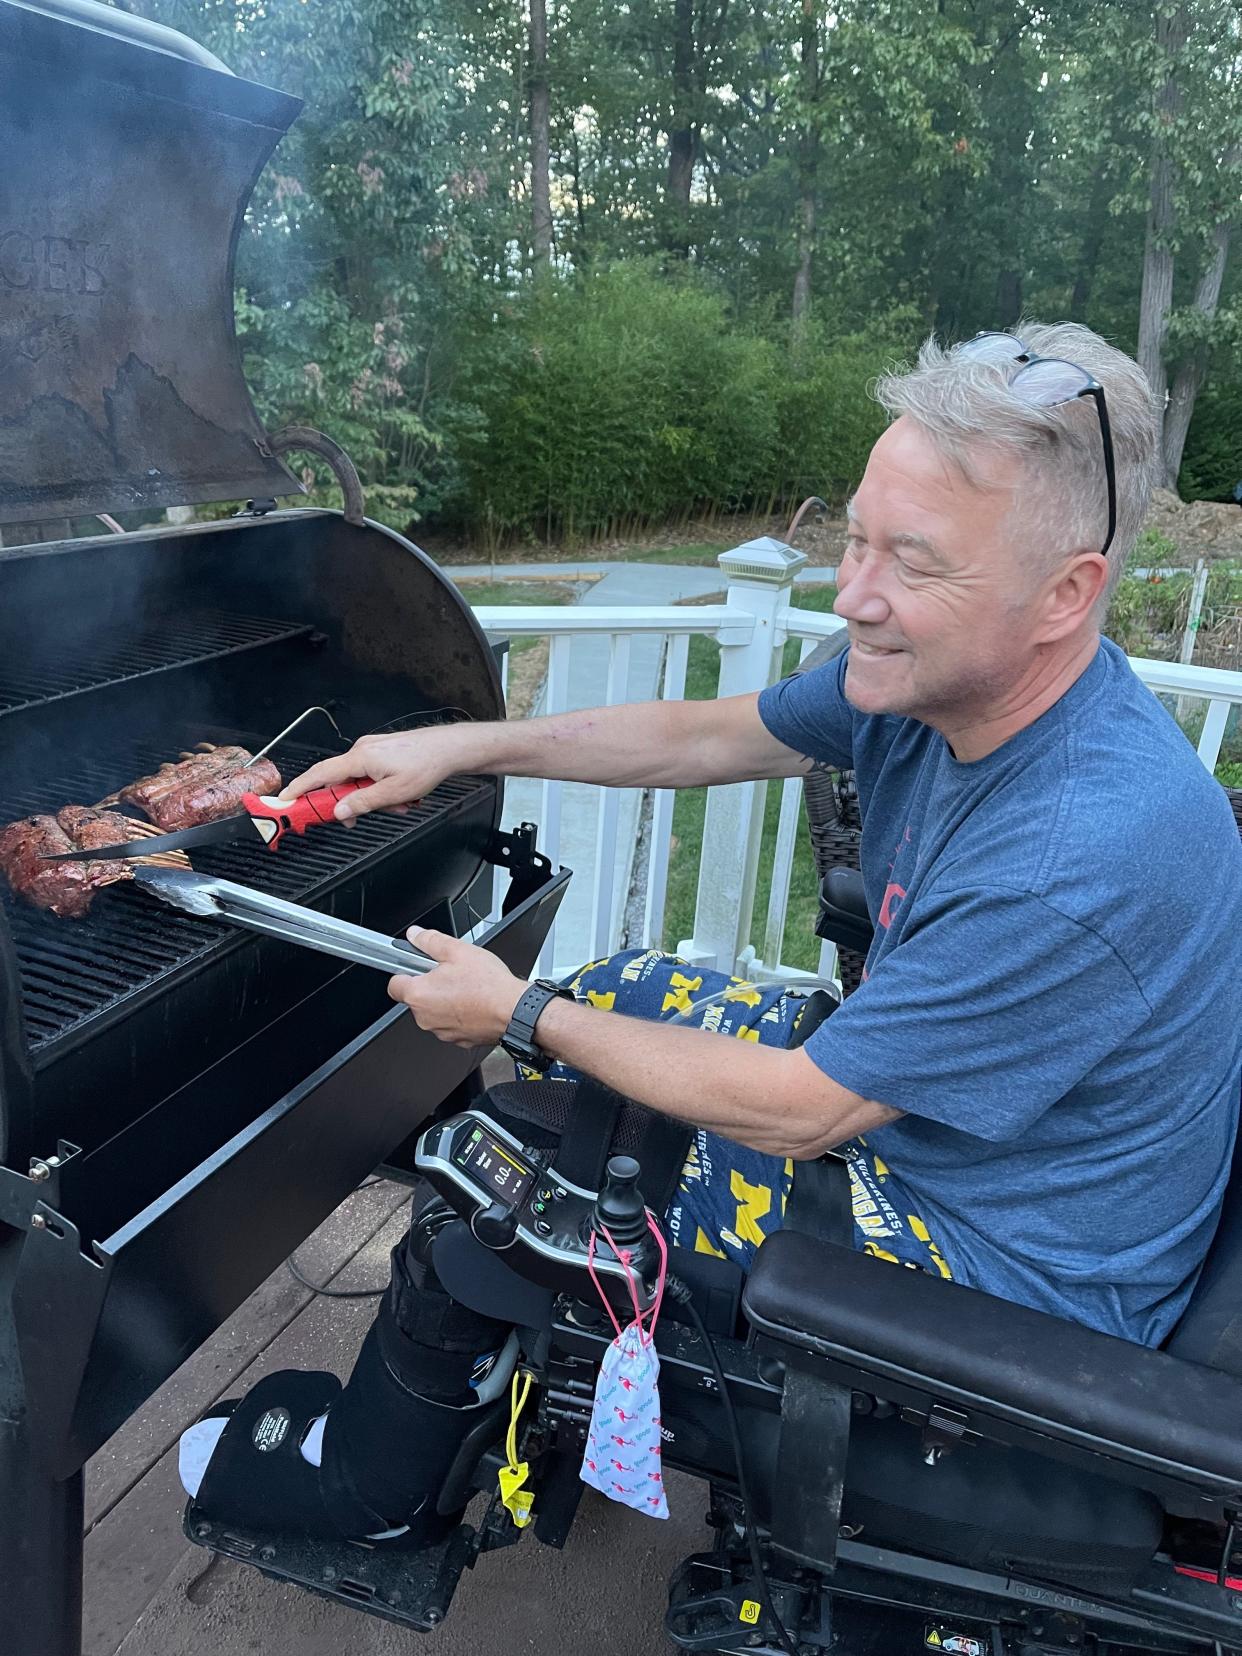 Even after a June 2021 crash that left Scott Spitnale with severe injuries, he still enjoys grilling at his Keedysville home.